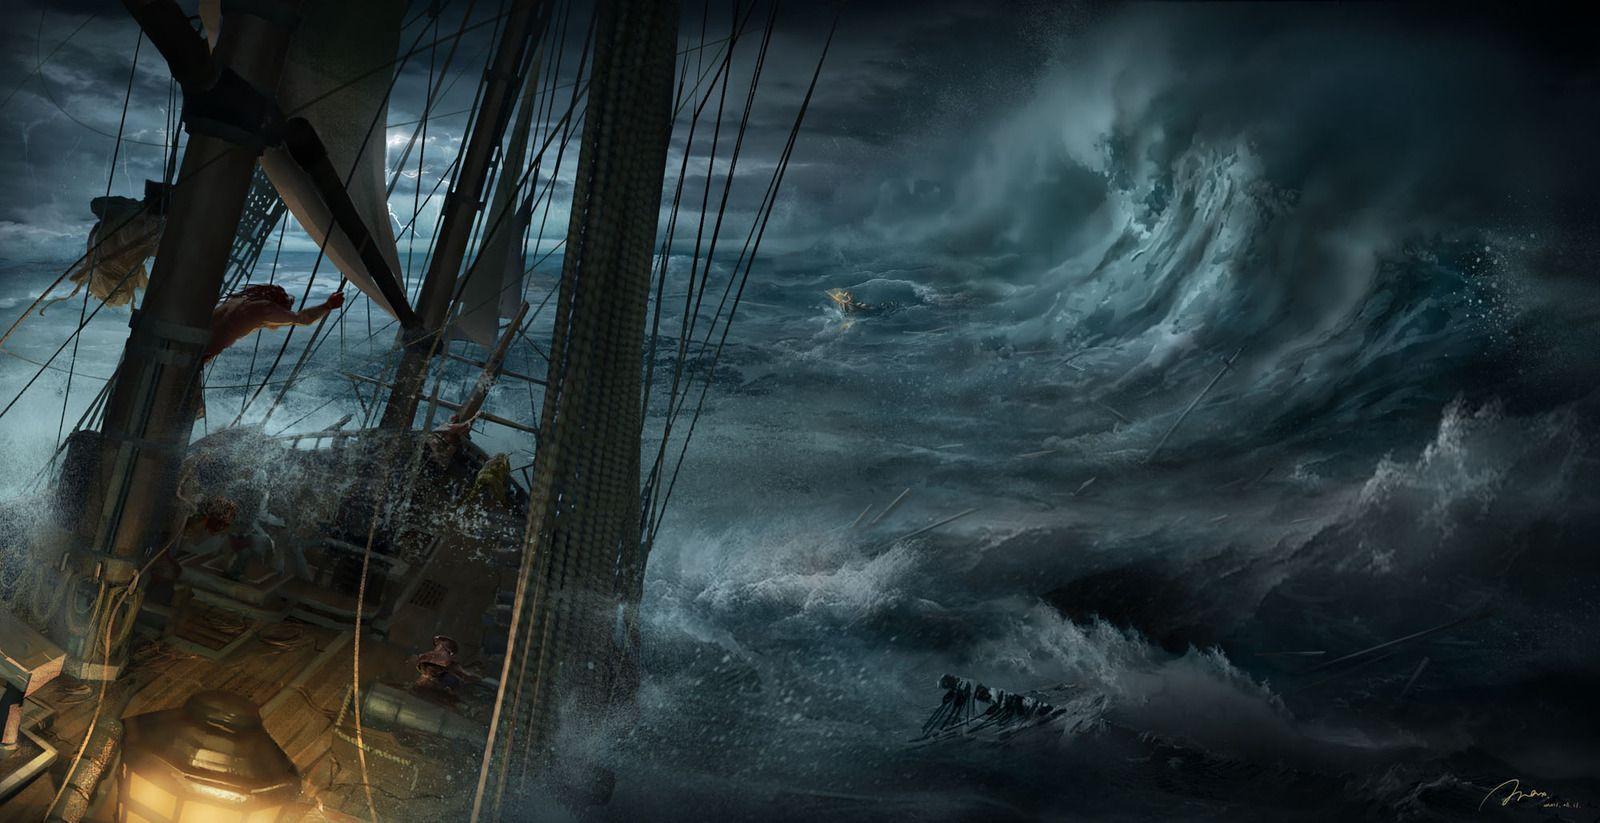 The Perfect Storm Picture 2d, fantasy, illustration, ship